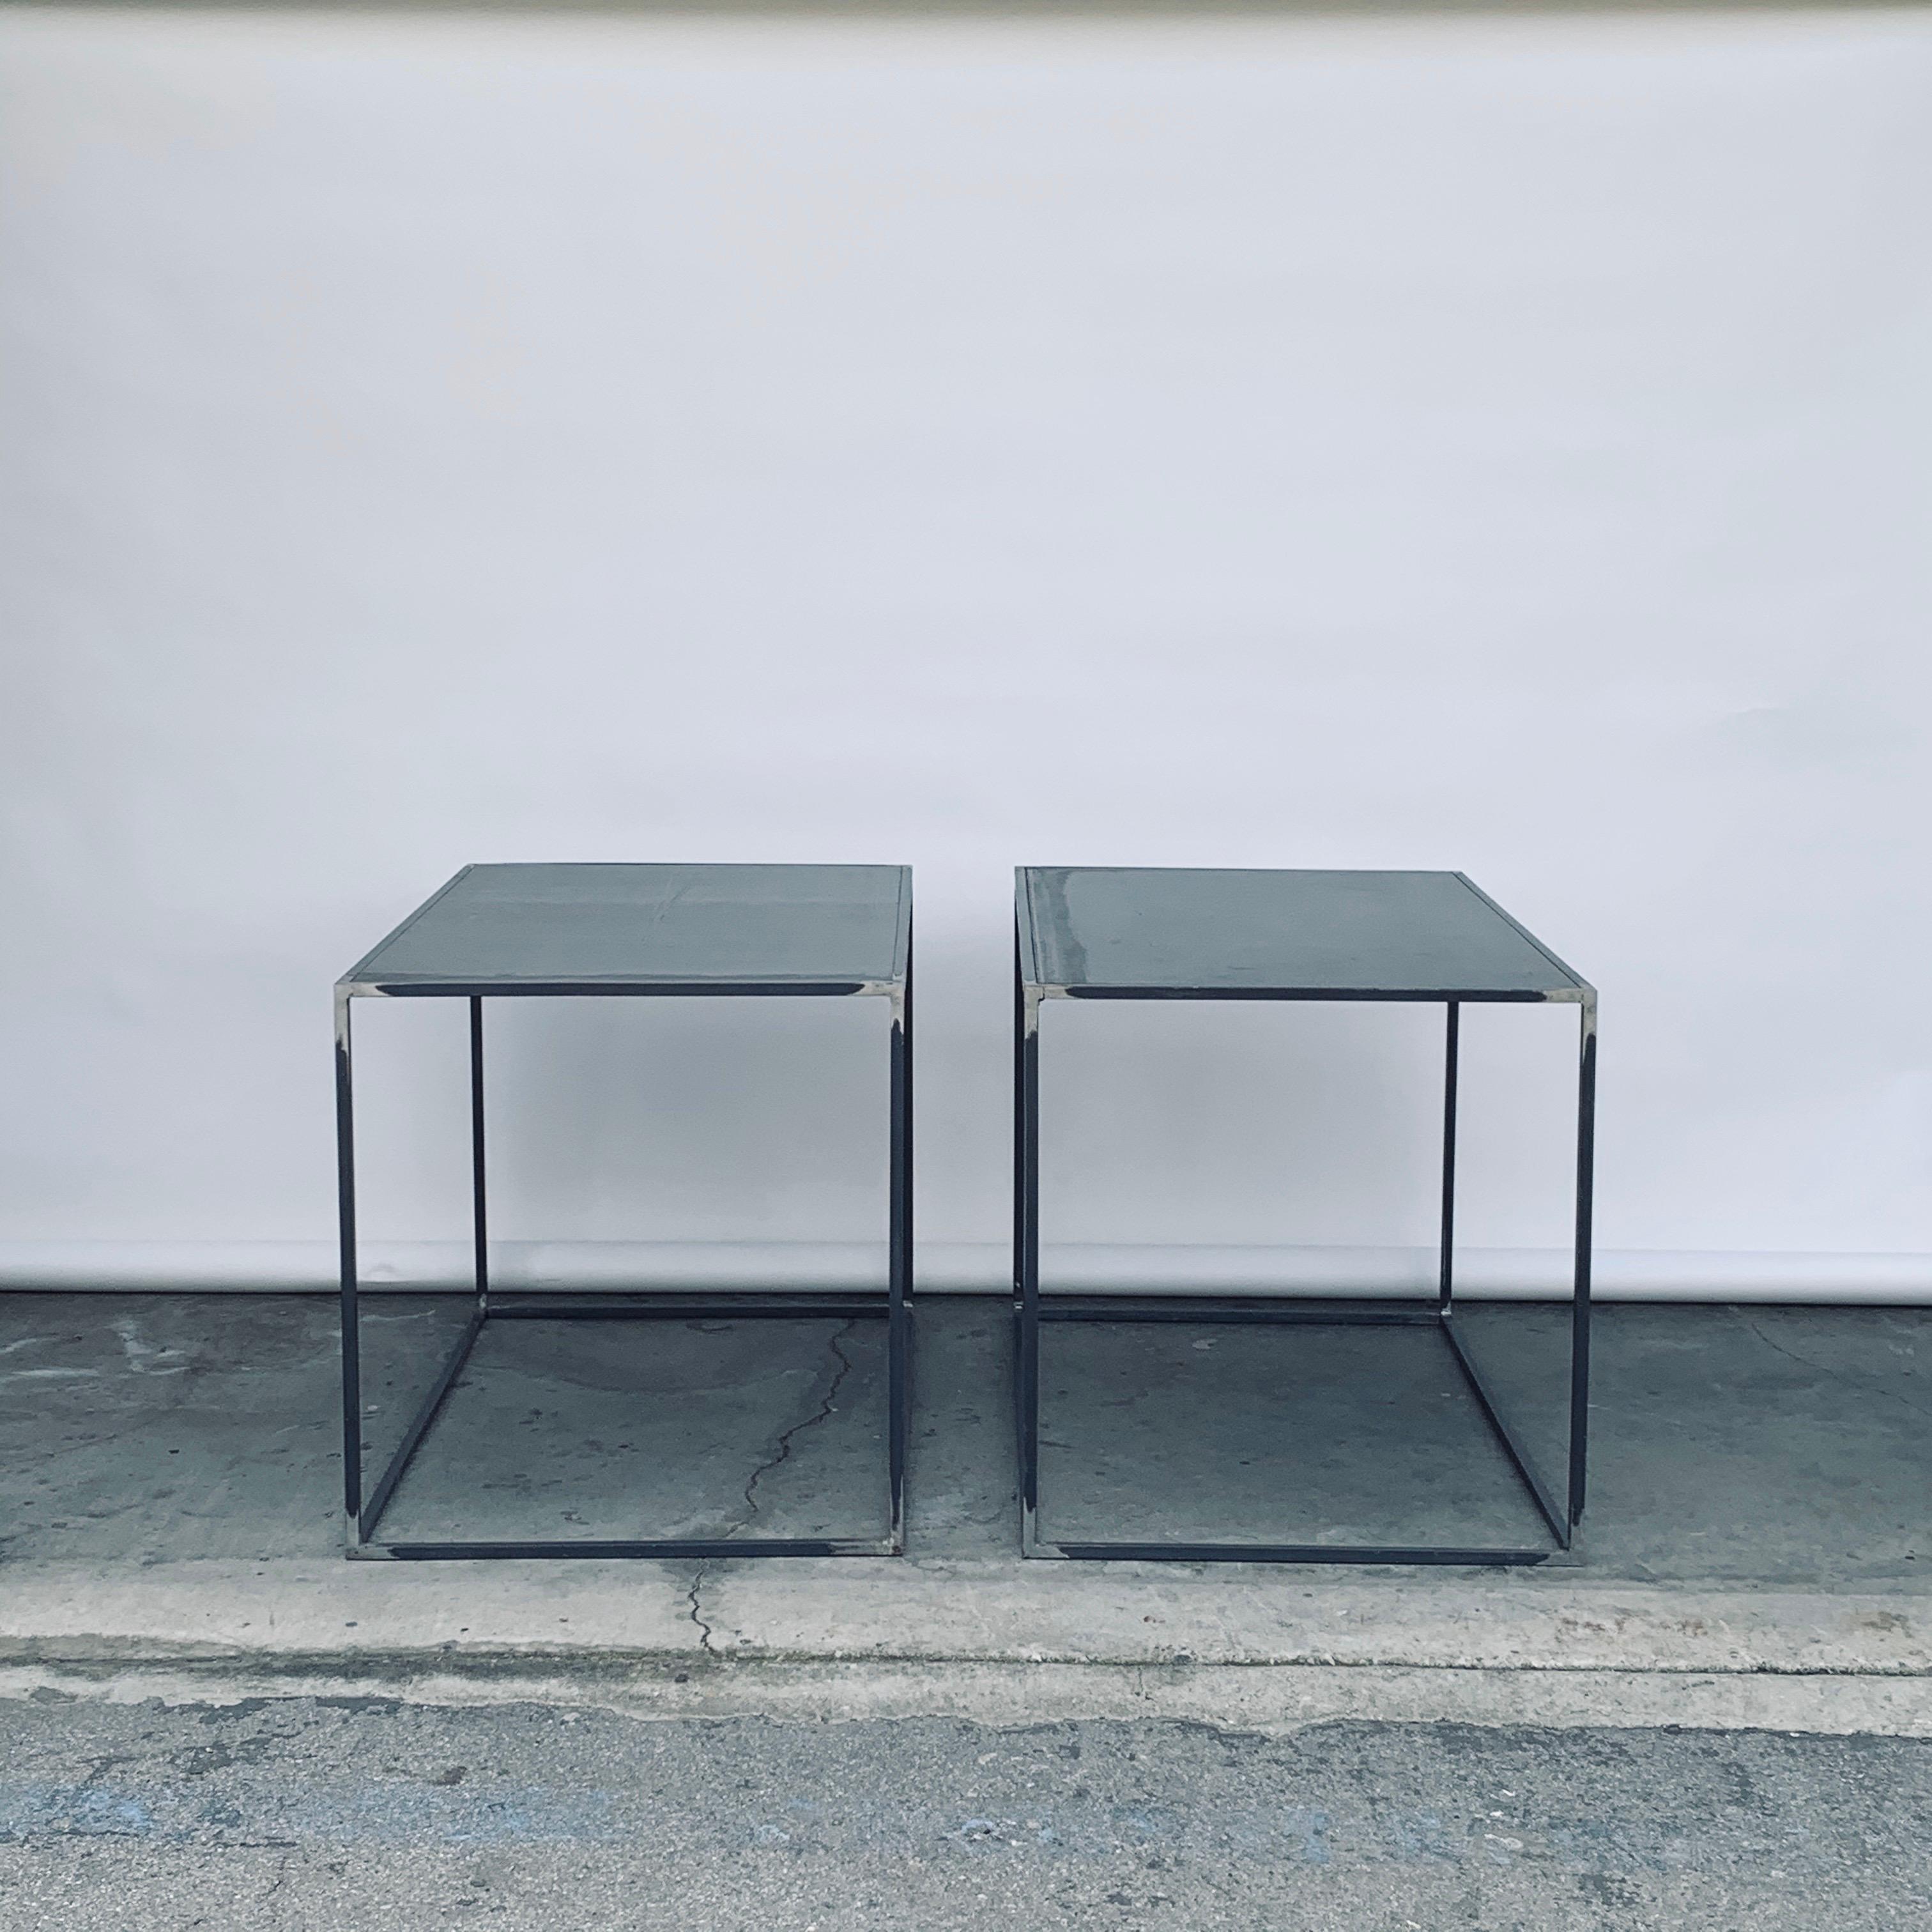 Pair of large 'Filiforme' patinated steel plate side or end tables by Design Frères. Inspired by the Wabi-Sabi Minimalist aesthetic philosophy updated by designers like Axel Vervoordt.